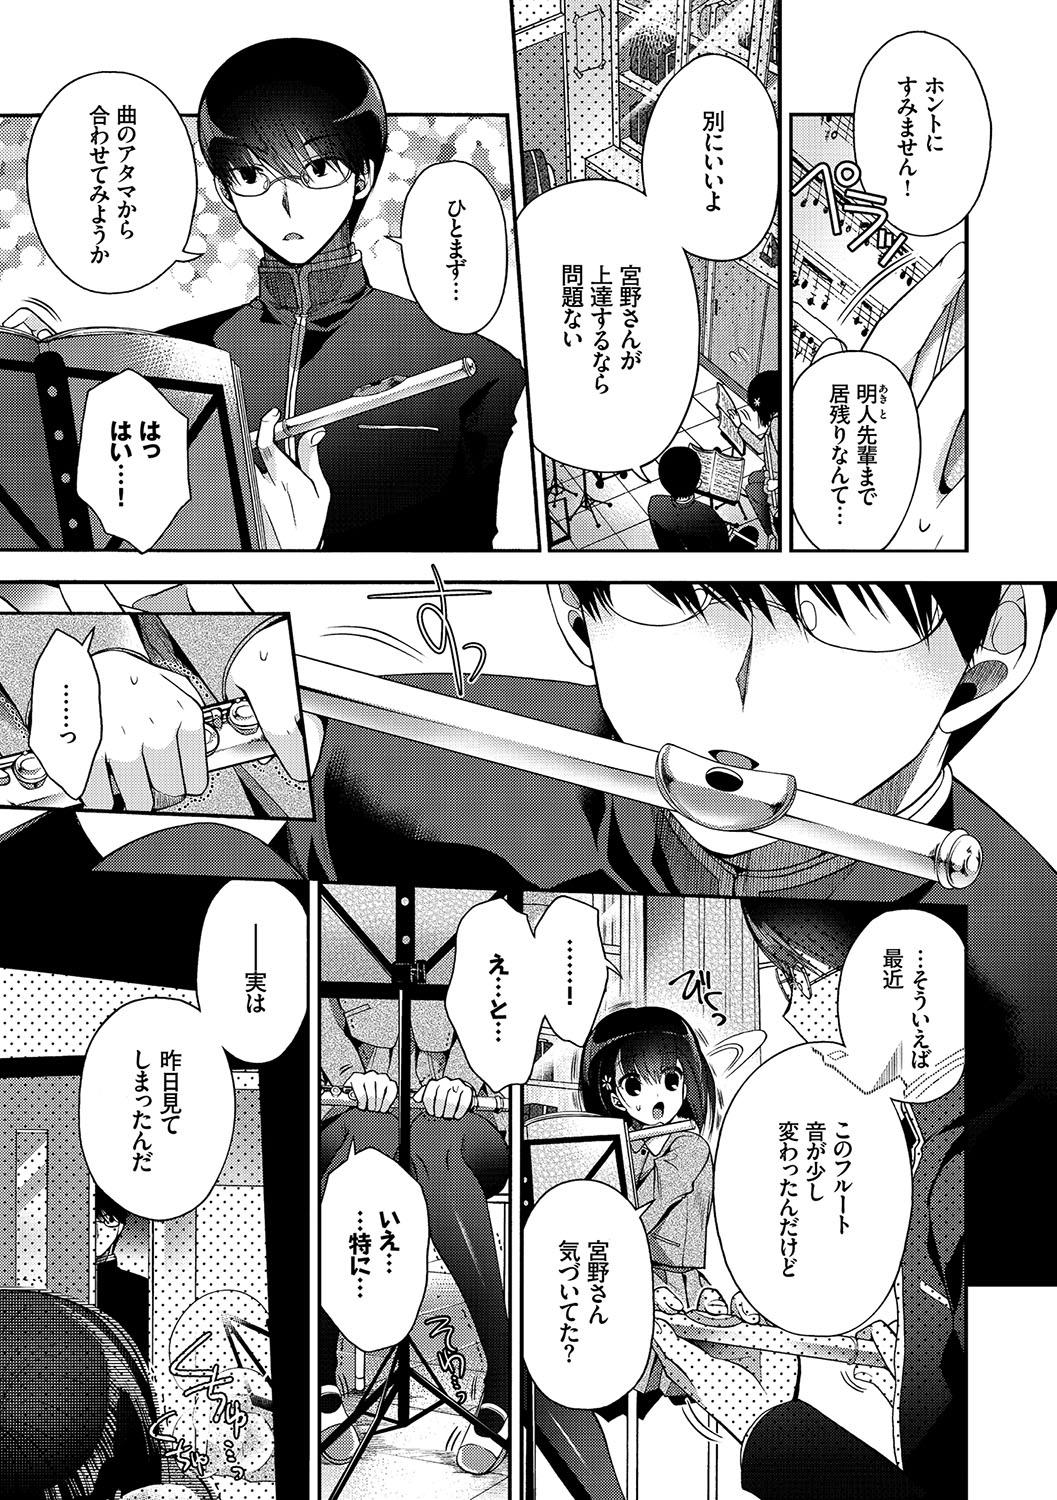 Cut Hatsukoi Melty - Melty First Love Cachonda - Page 6